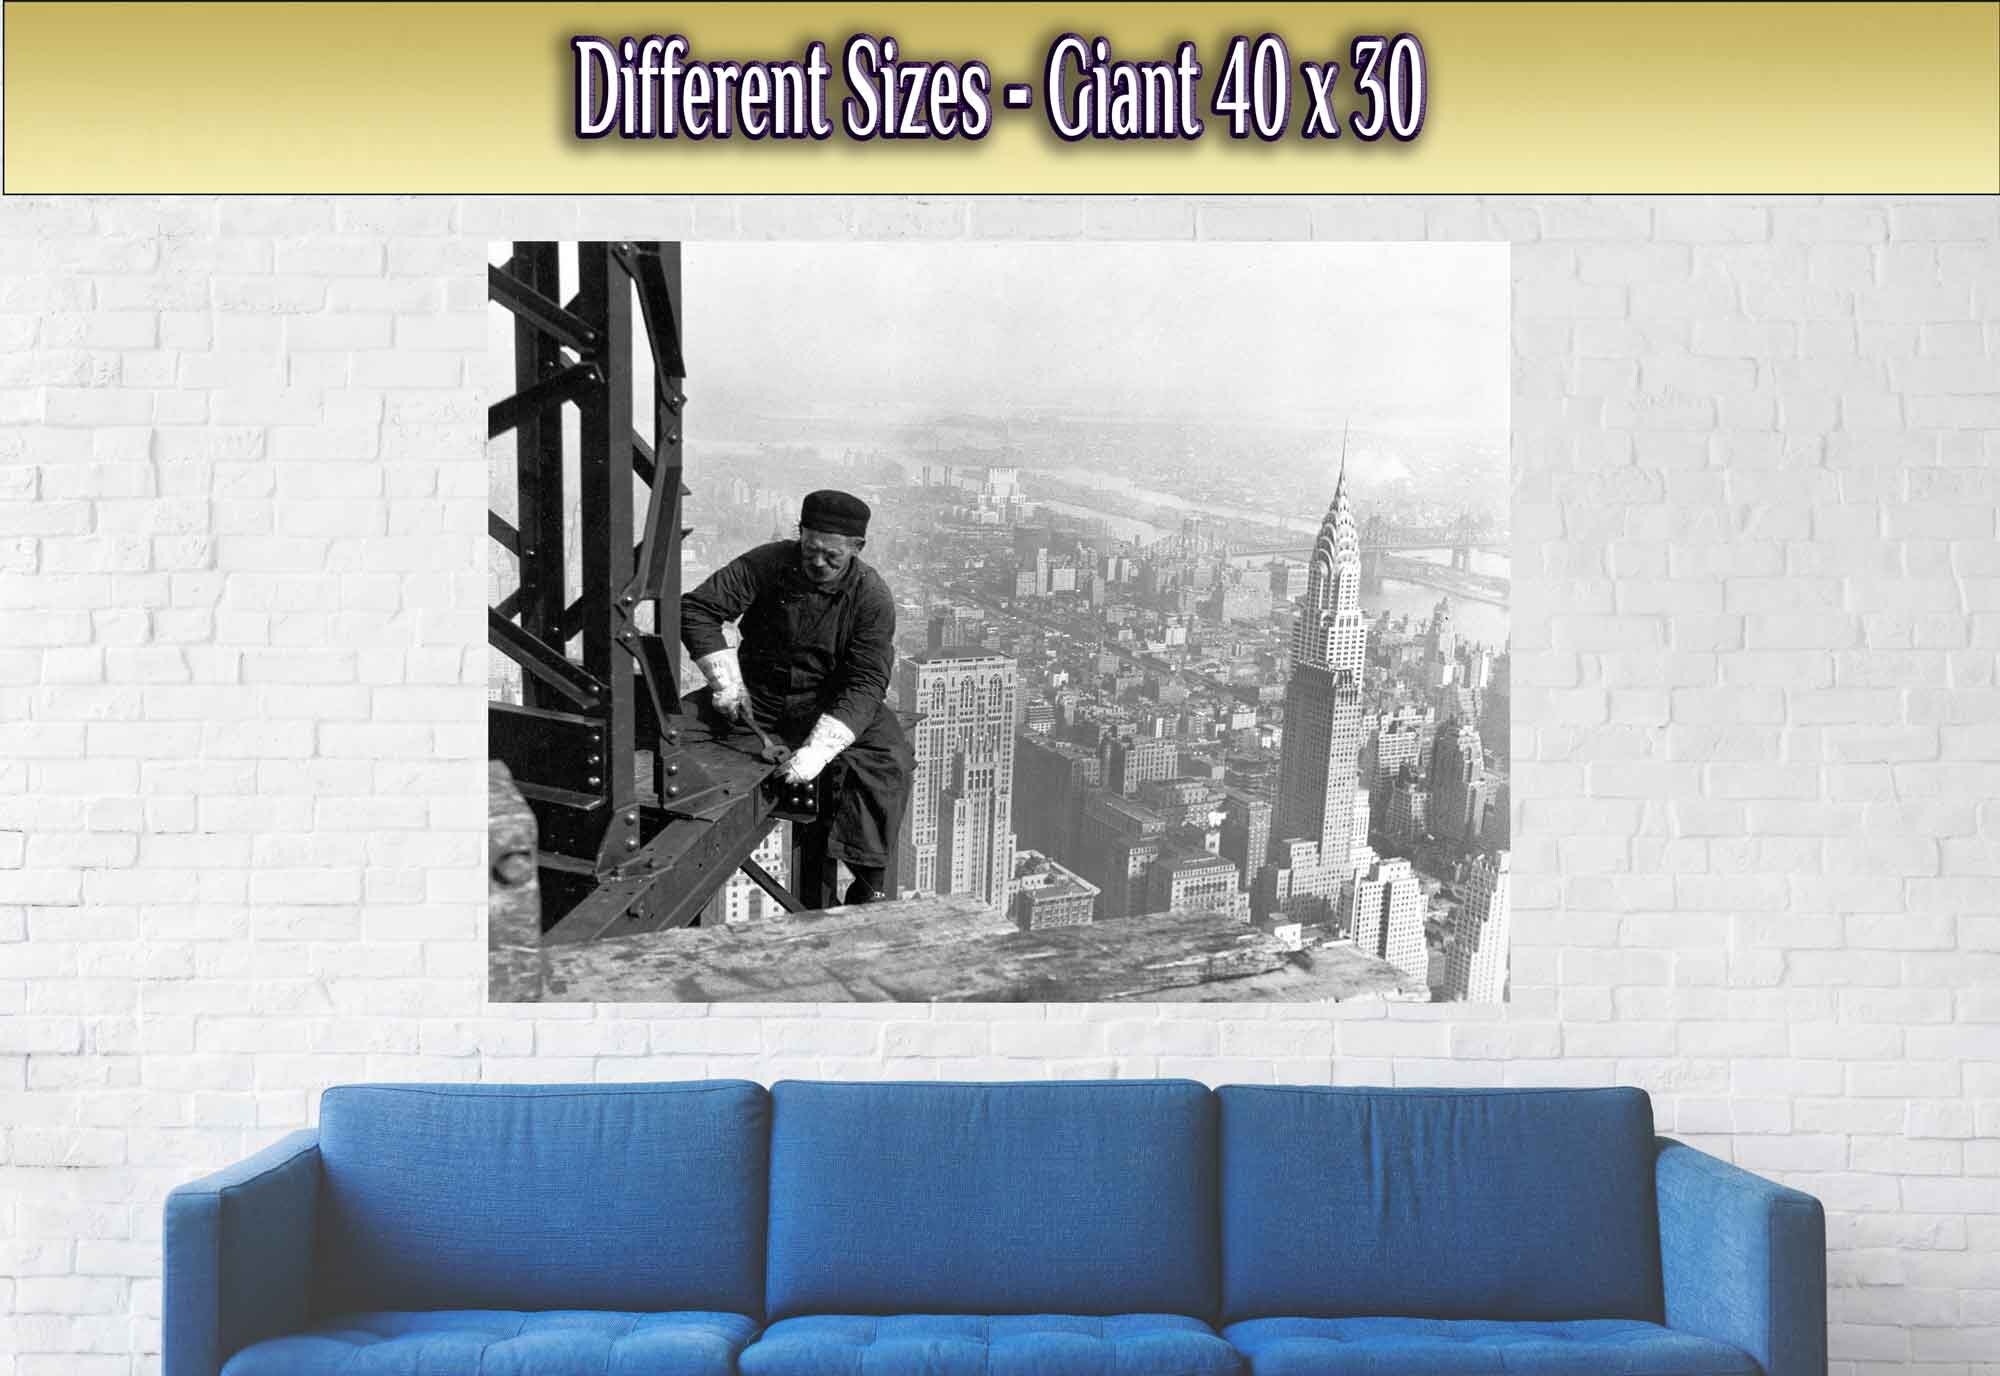 Empire State Worker Poster, Vintage Photo Print From 1930, Lewis Hine - Daring New York Construction Workers - WallArtPrints4U